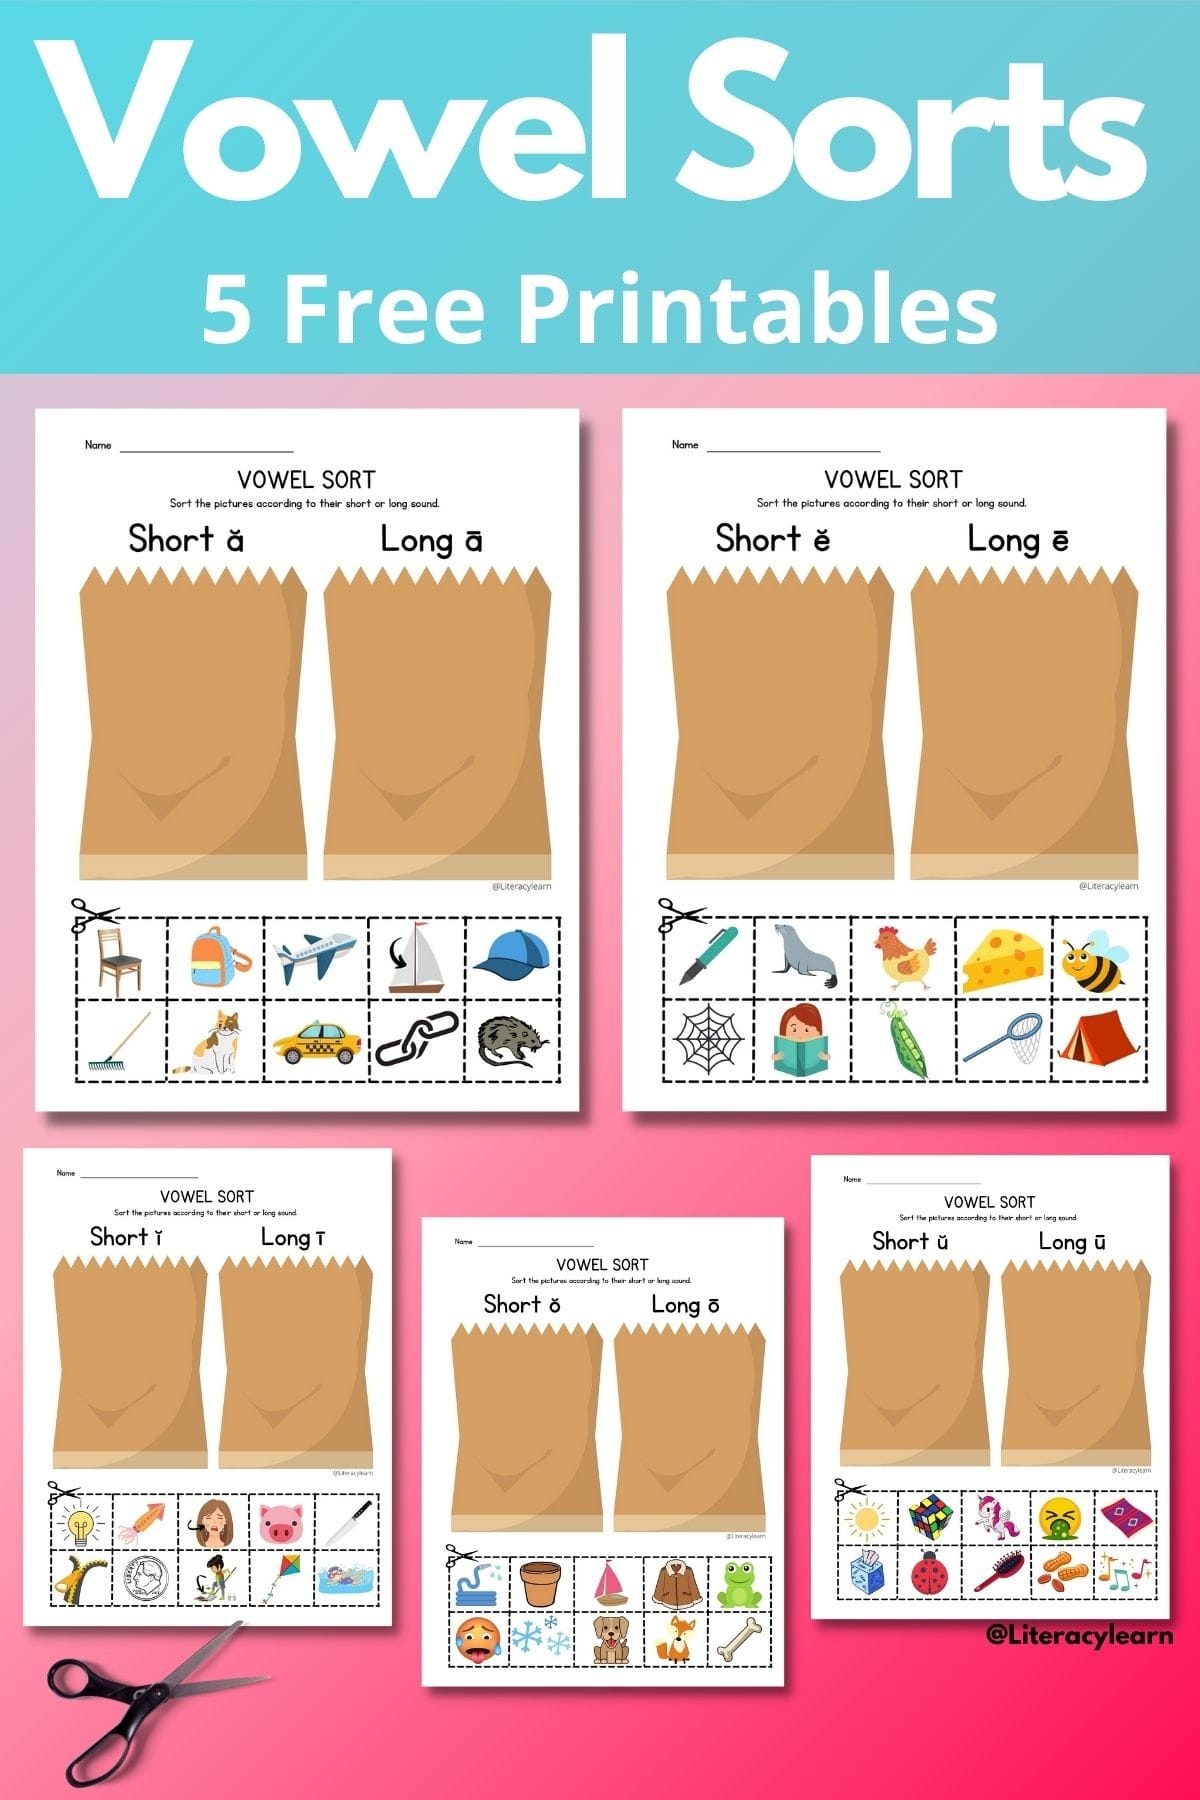 Five printables displayed on a bright pink background with large print "Vowel Sorts" words